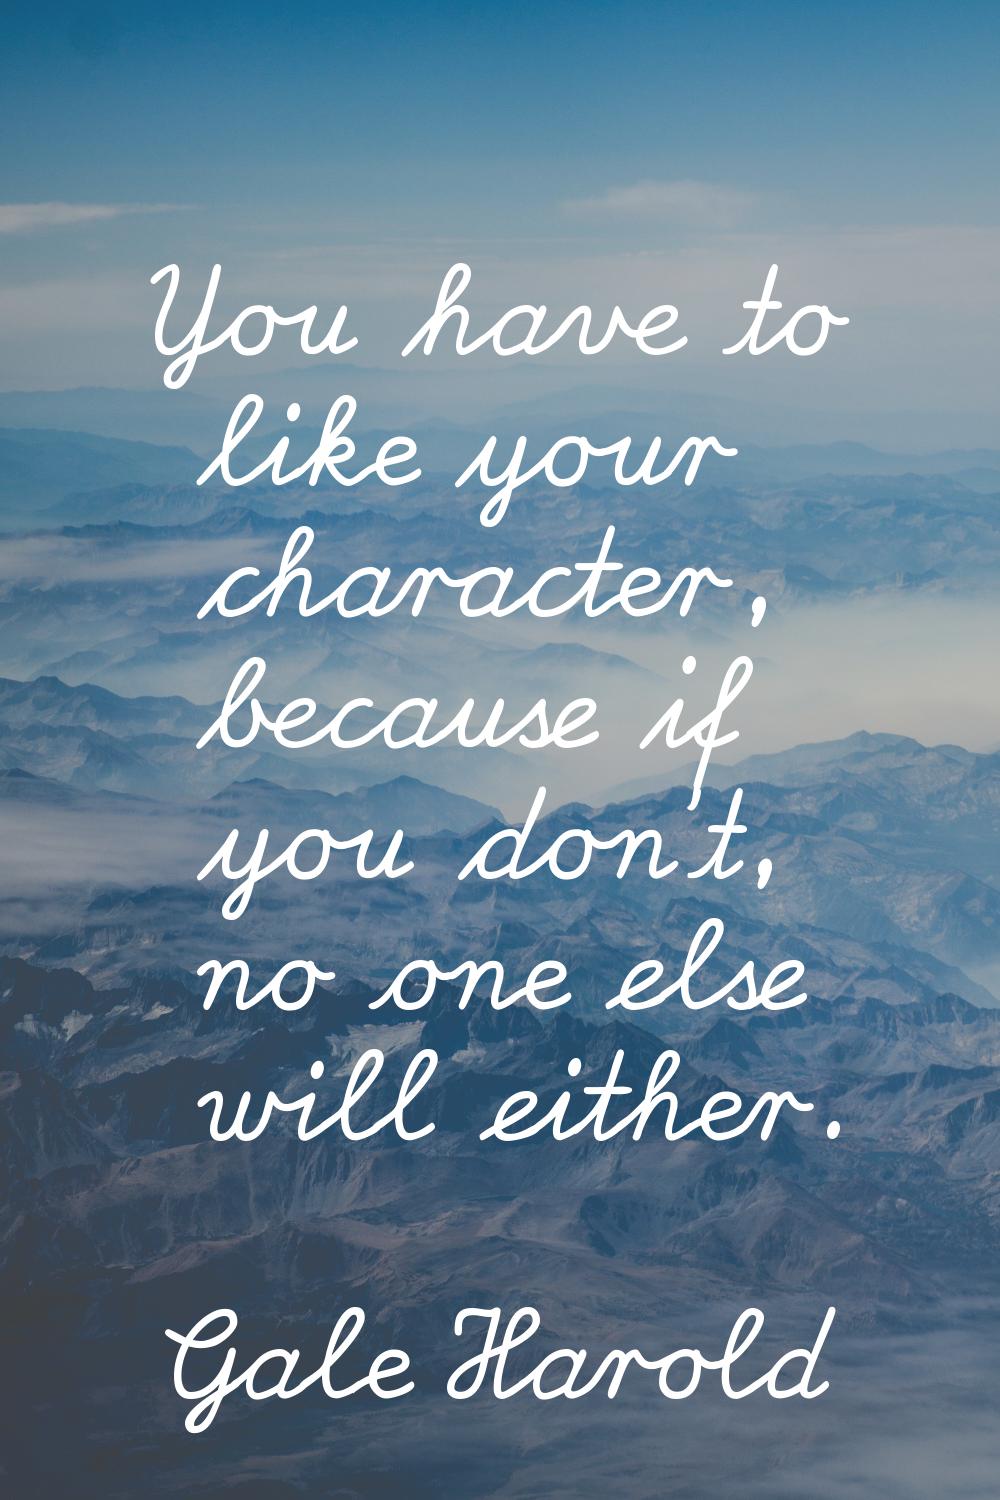 You have to like your character, because if you don't, no one else will either.